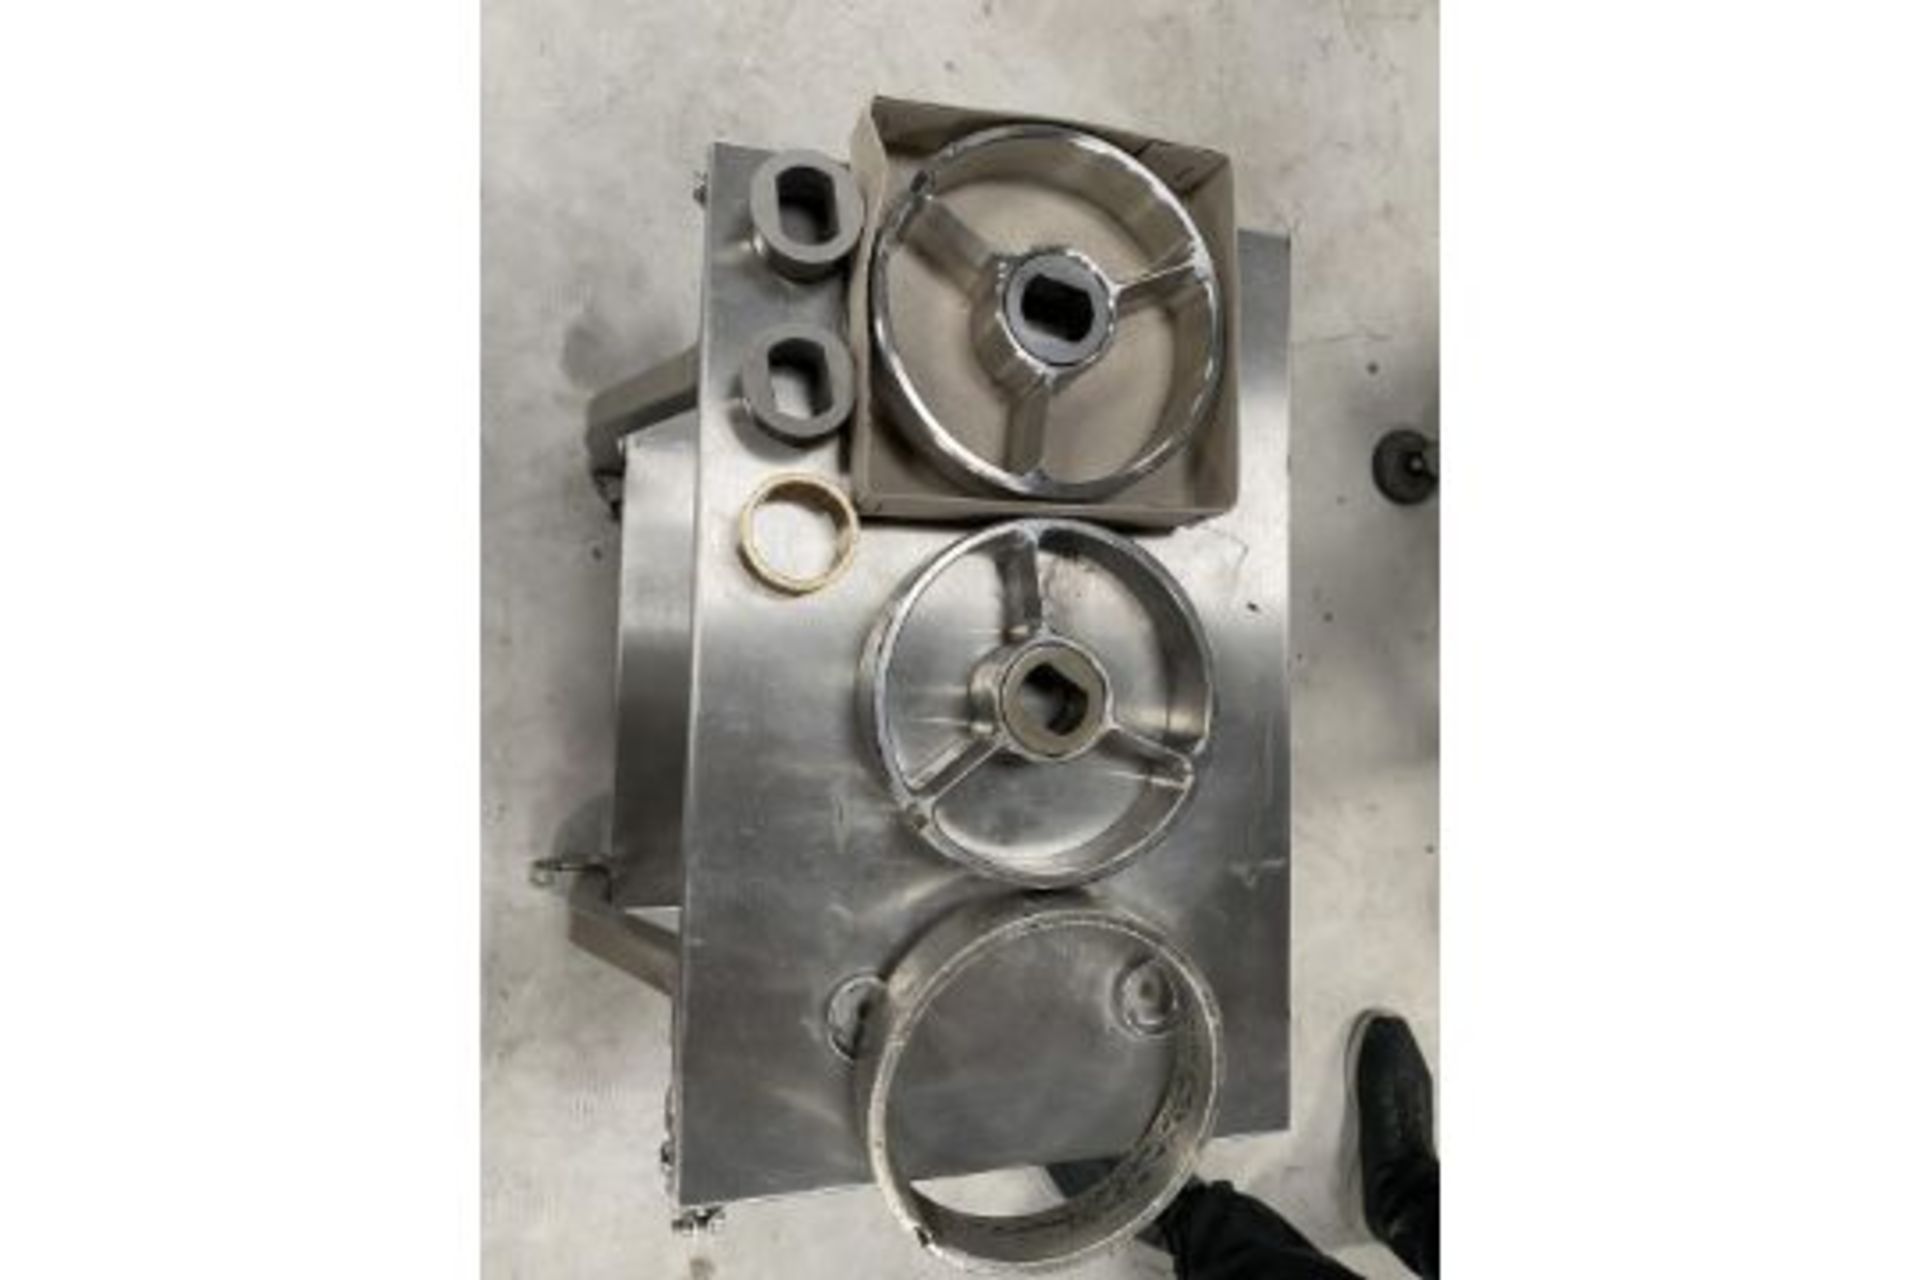 CATO PA160 CROSS FEED MINCER. - Image 11 of 20